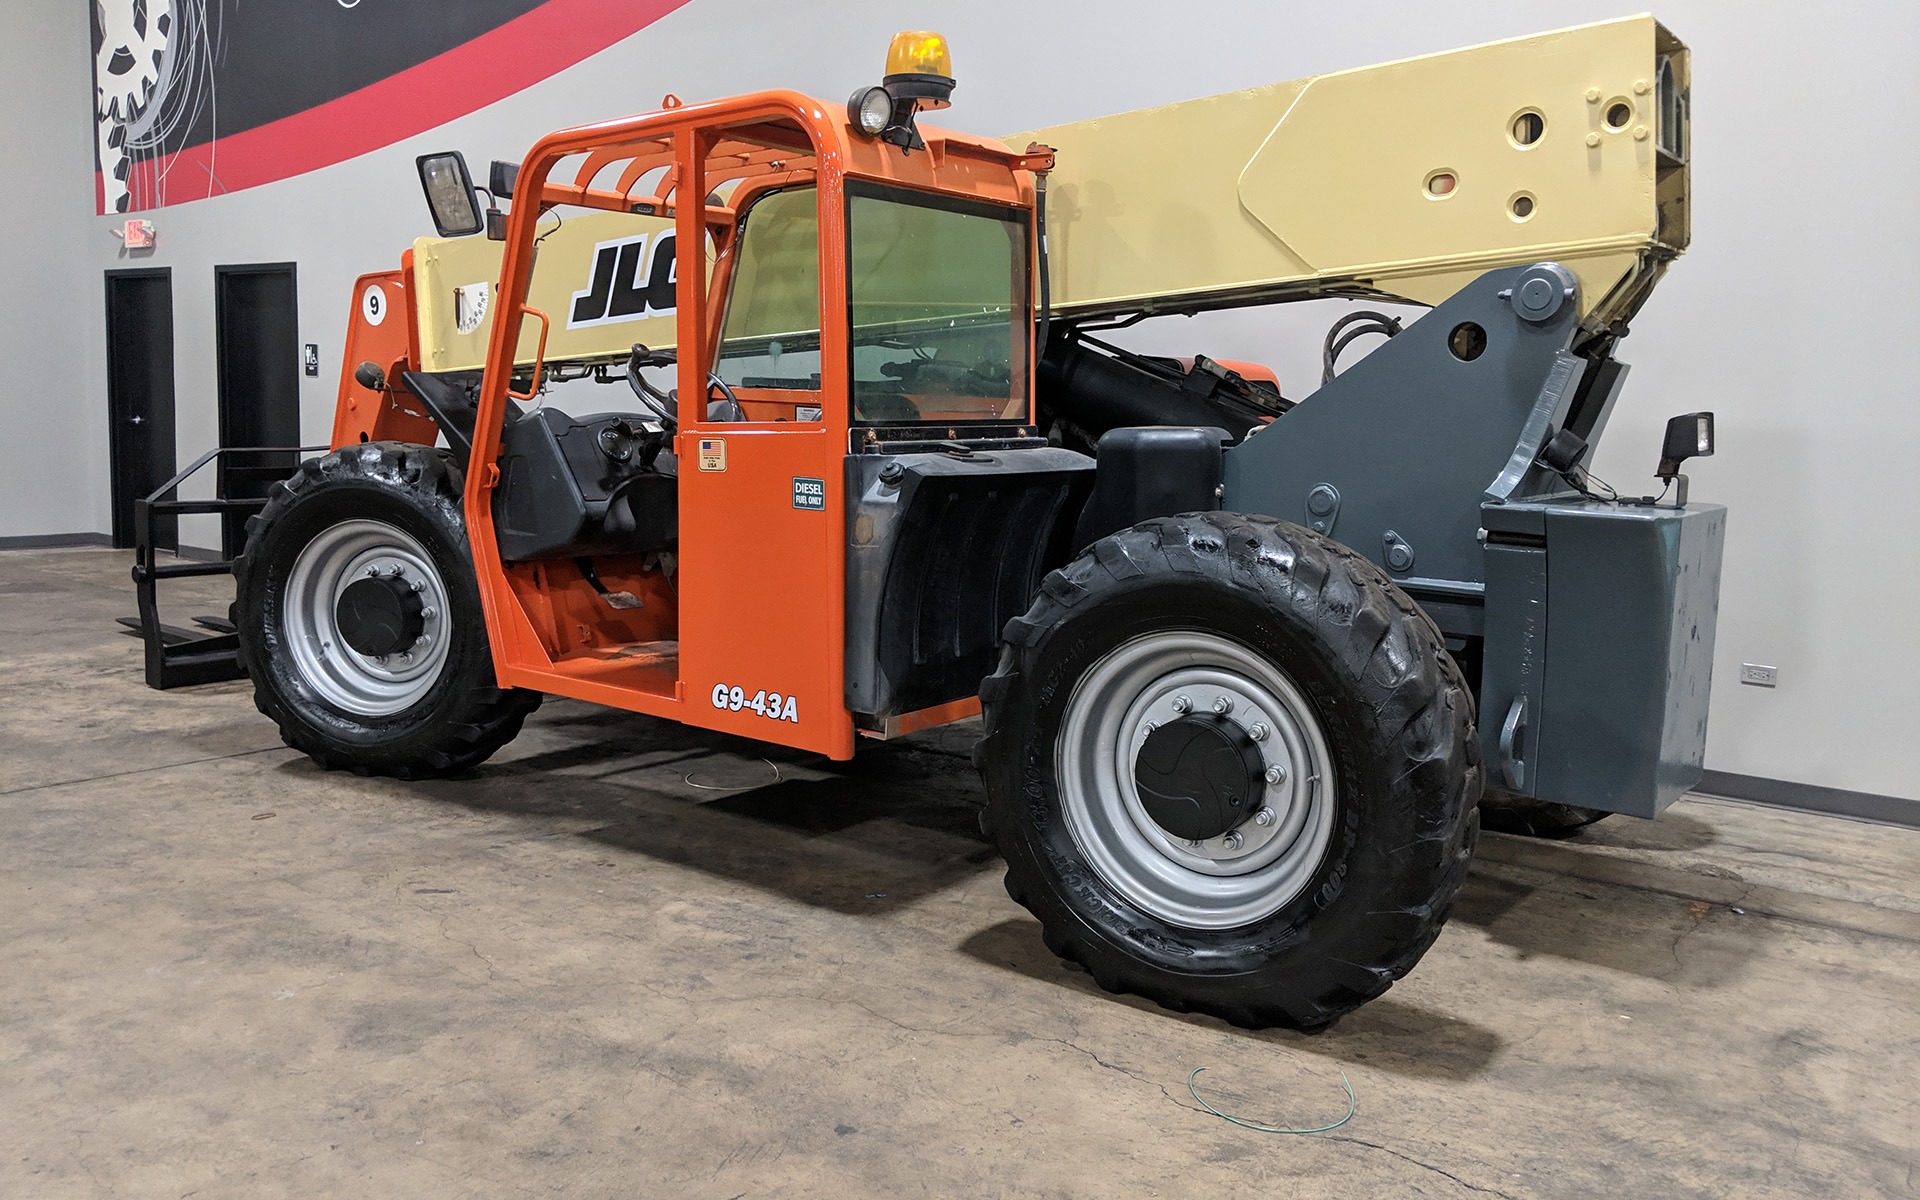 Used 2012 JLG G9-43A  | Cary, IL